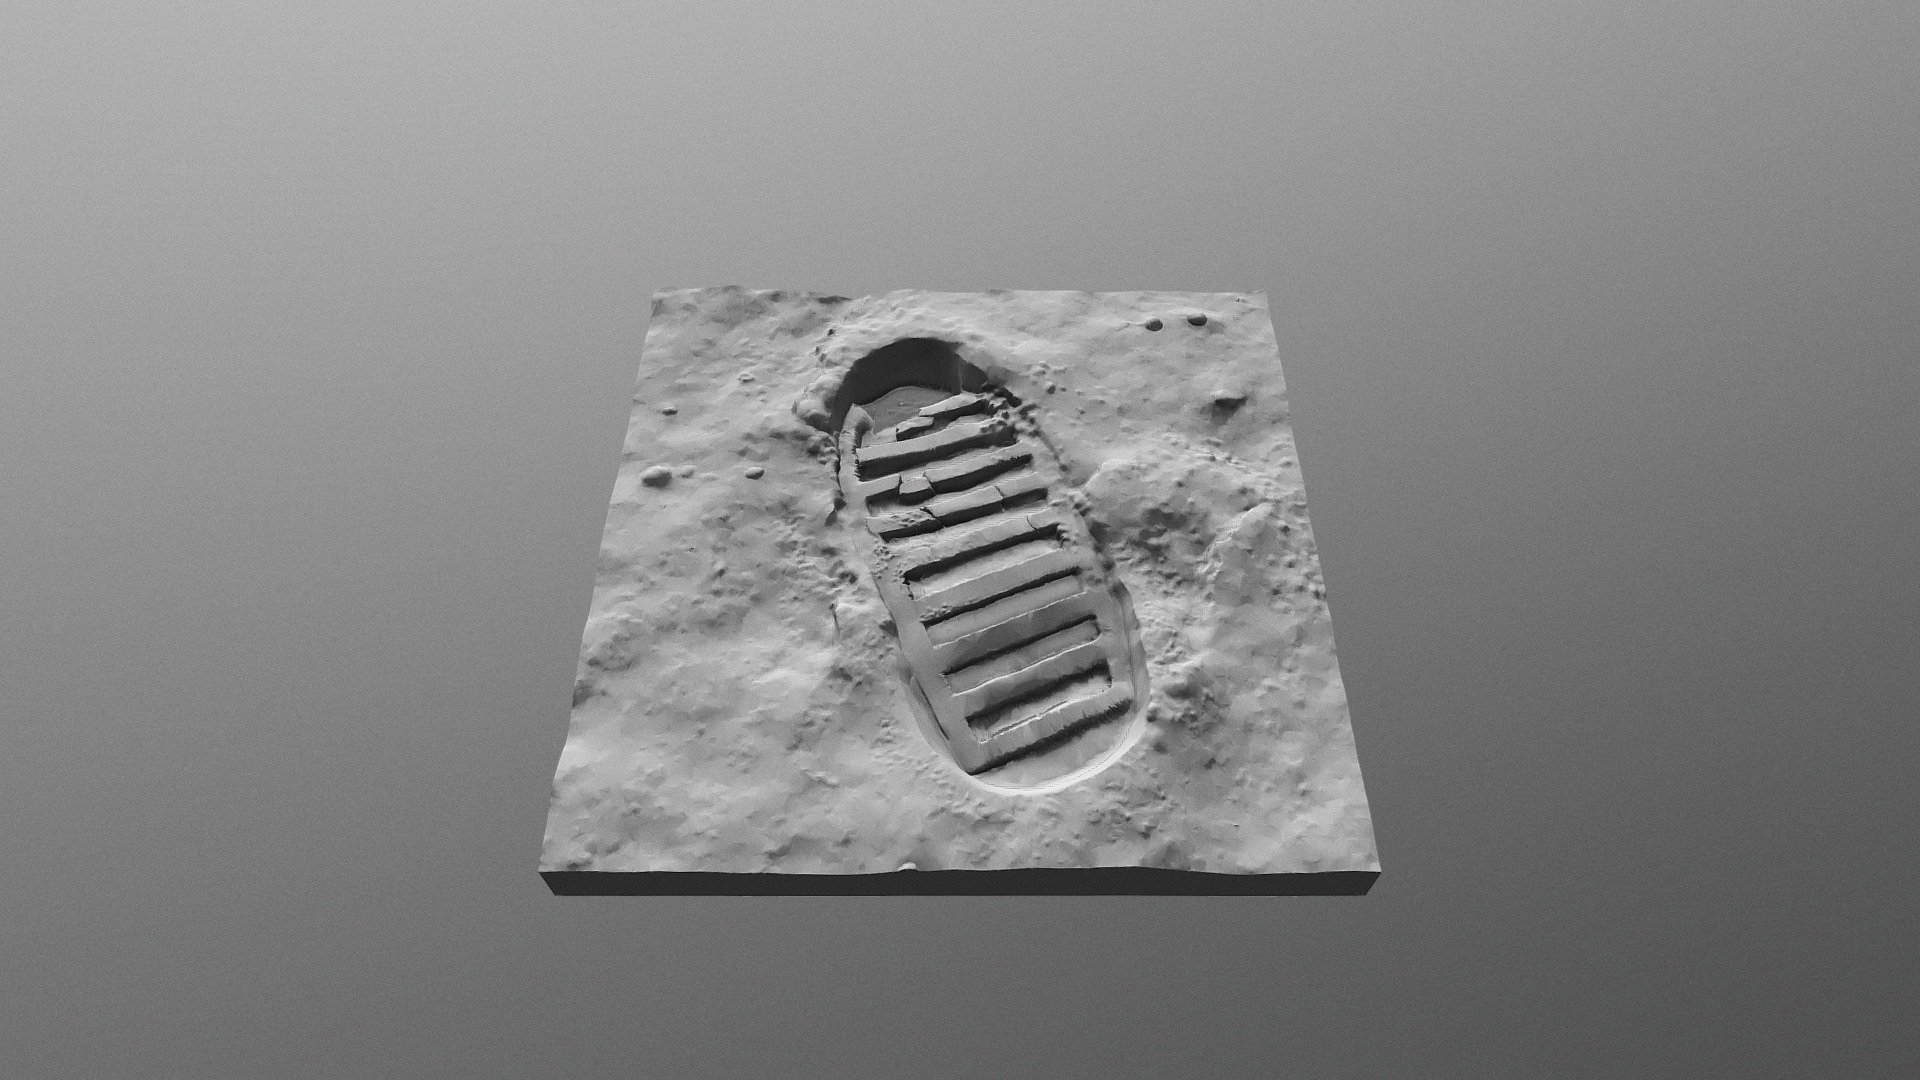 I 3D modeled and printed Buzz Aldrin's iconic first step.
More informations at https://imgur.com/a/rW1Bg - One small step for man - 3D model by taposk 3d model